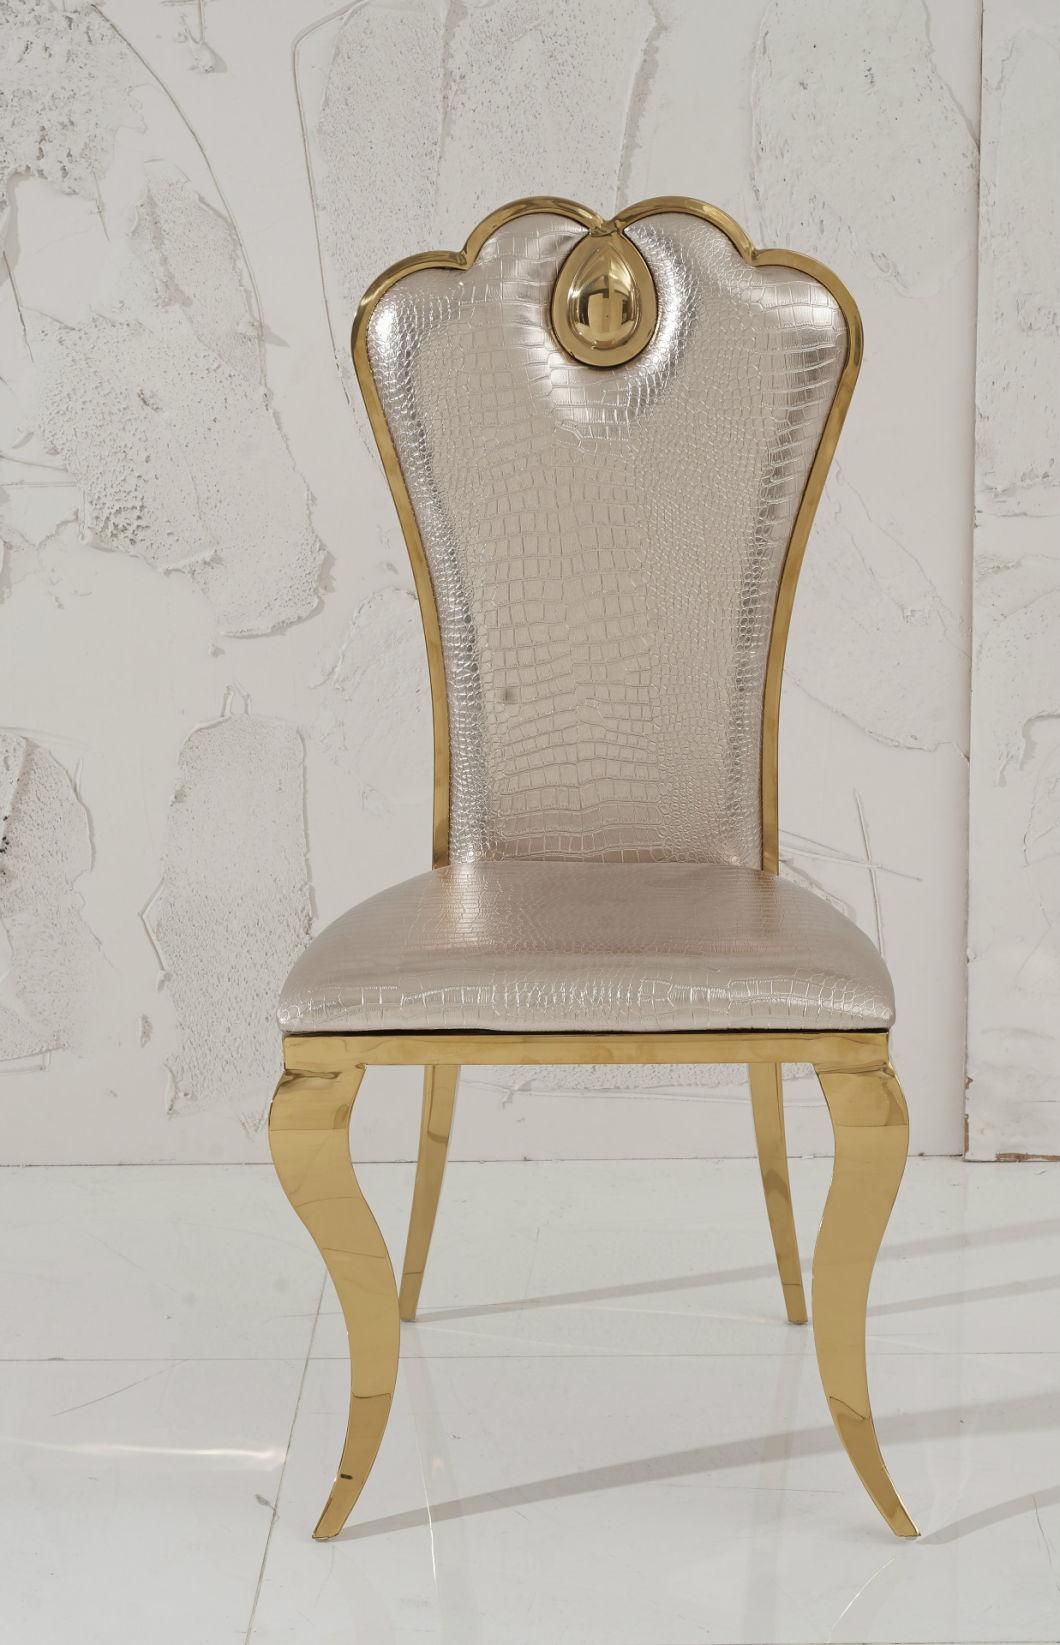 European Style Stainless Steel Luxury Hotel Banquet Dining Chair